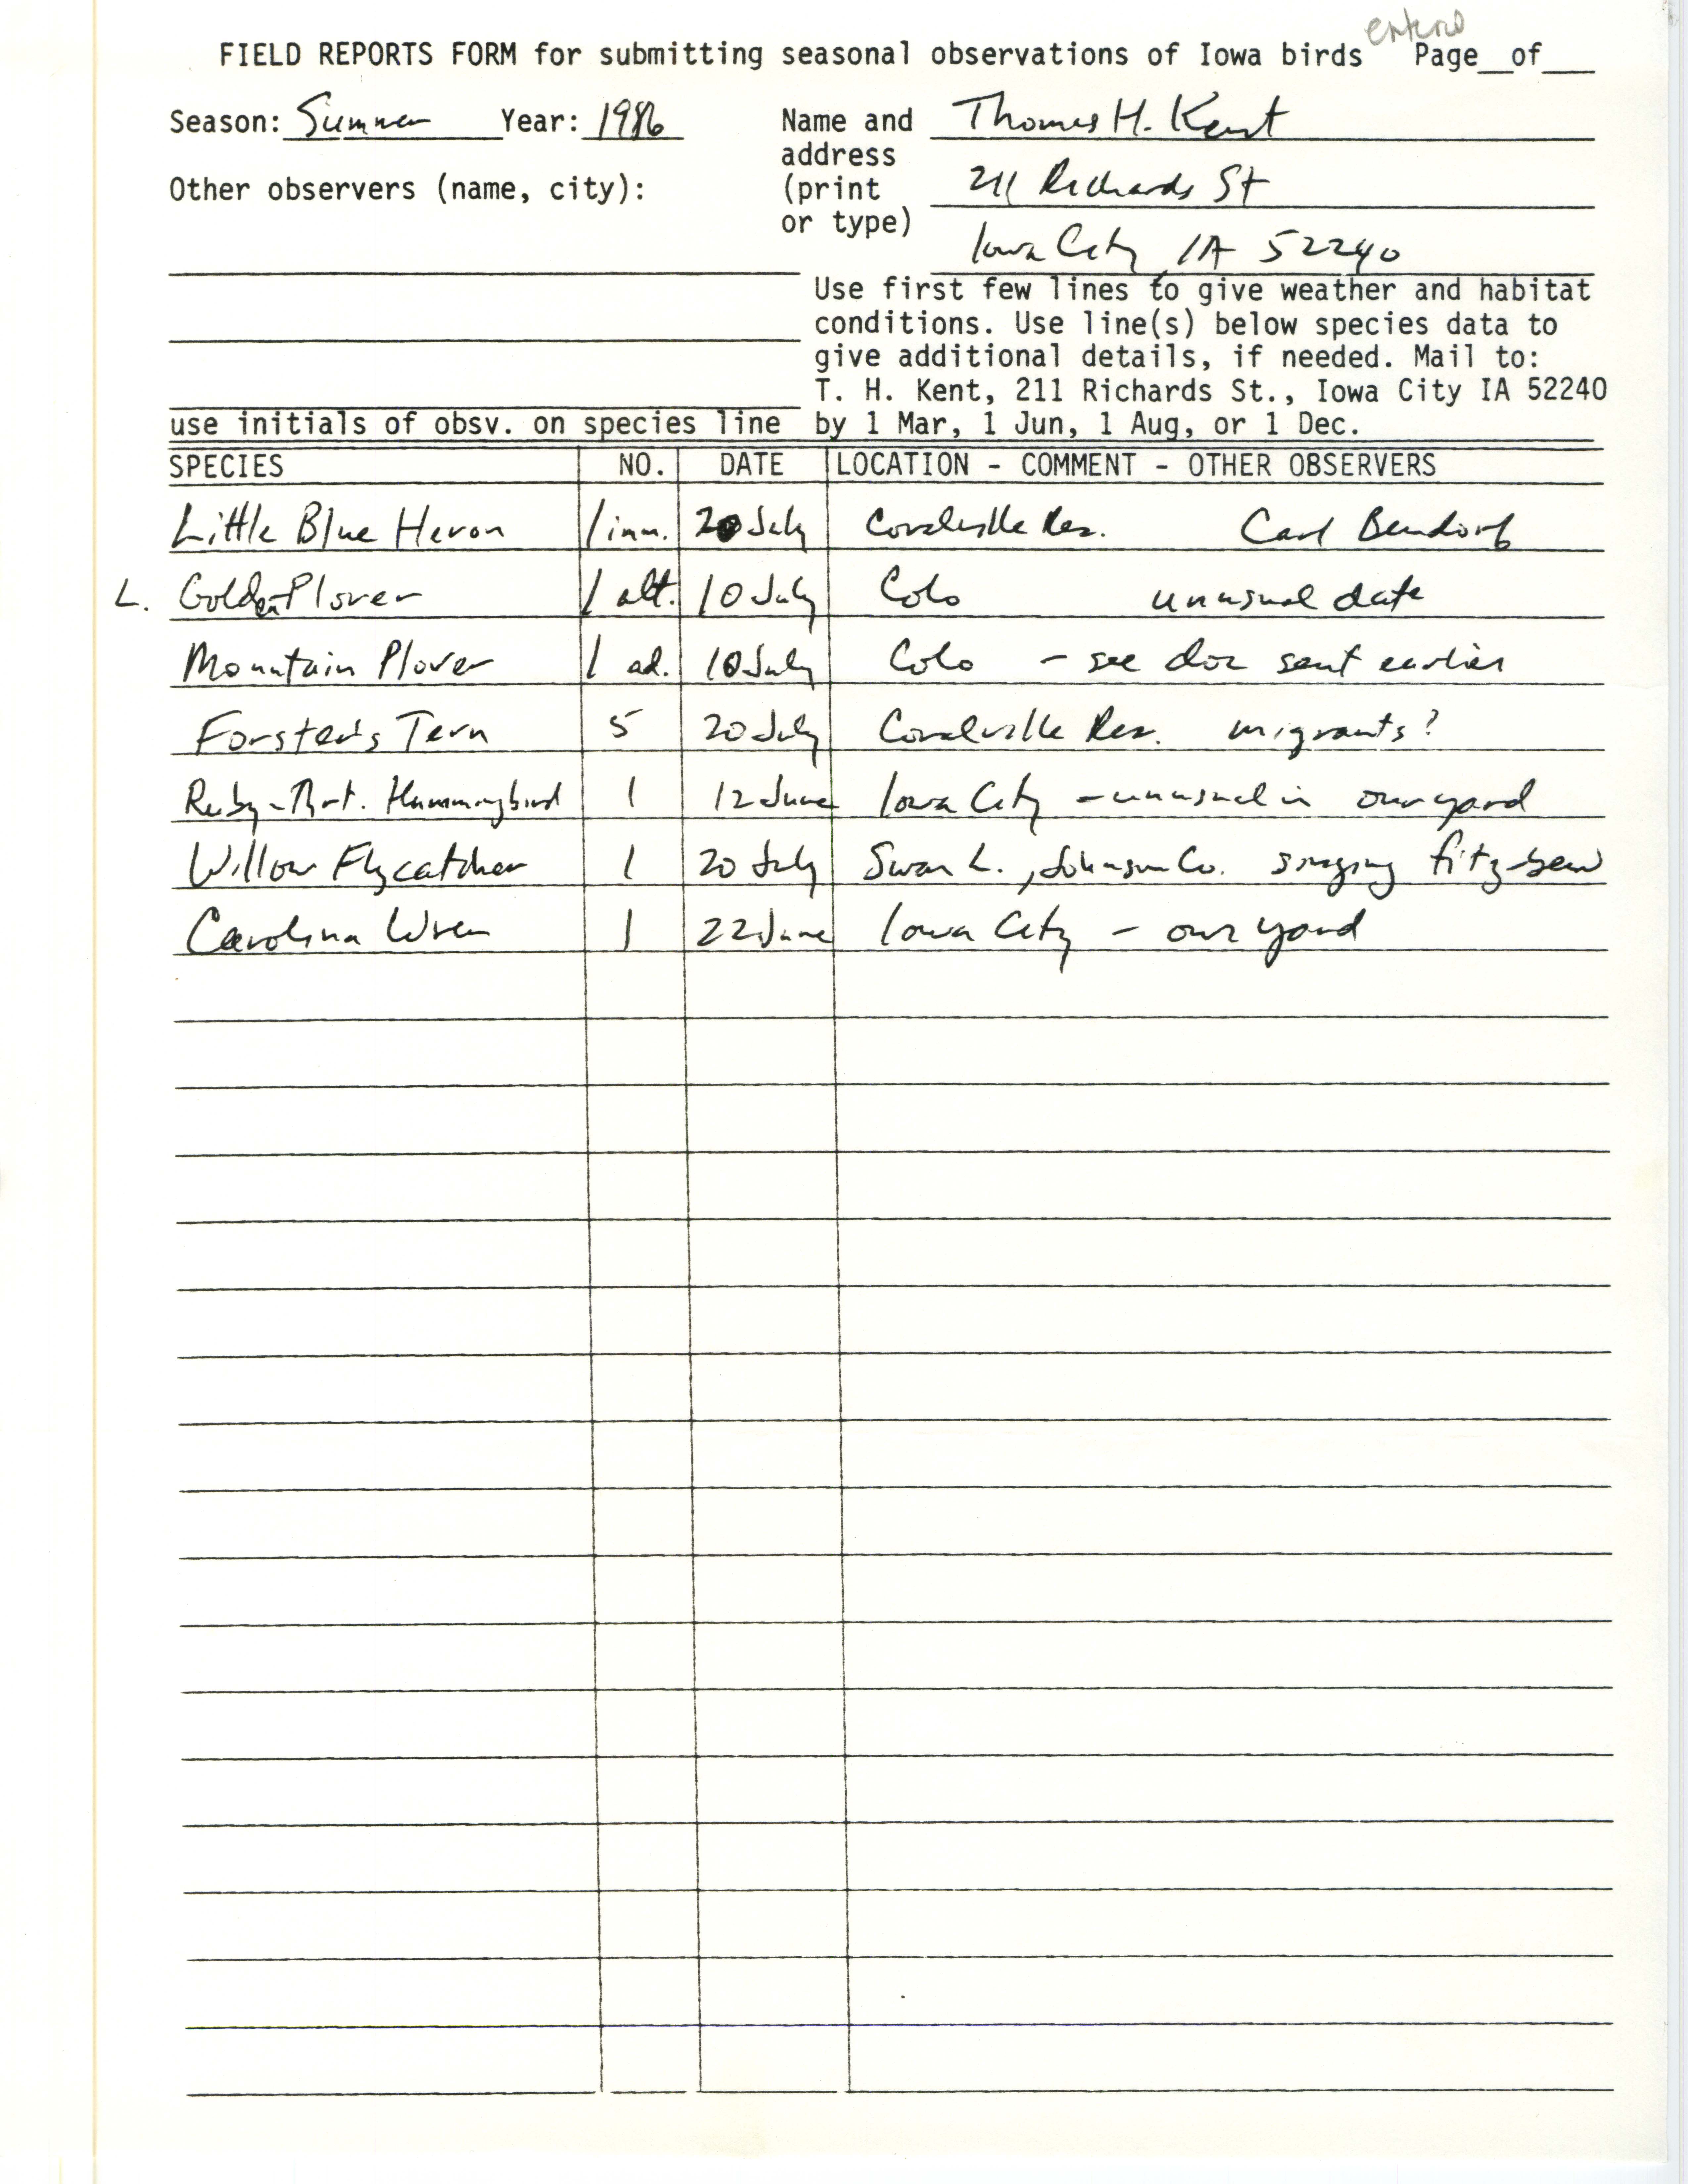 Field reports form for submitting seasonal observations of Iowa birds, Thomas H. Kent, summer 1986